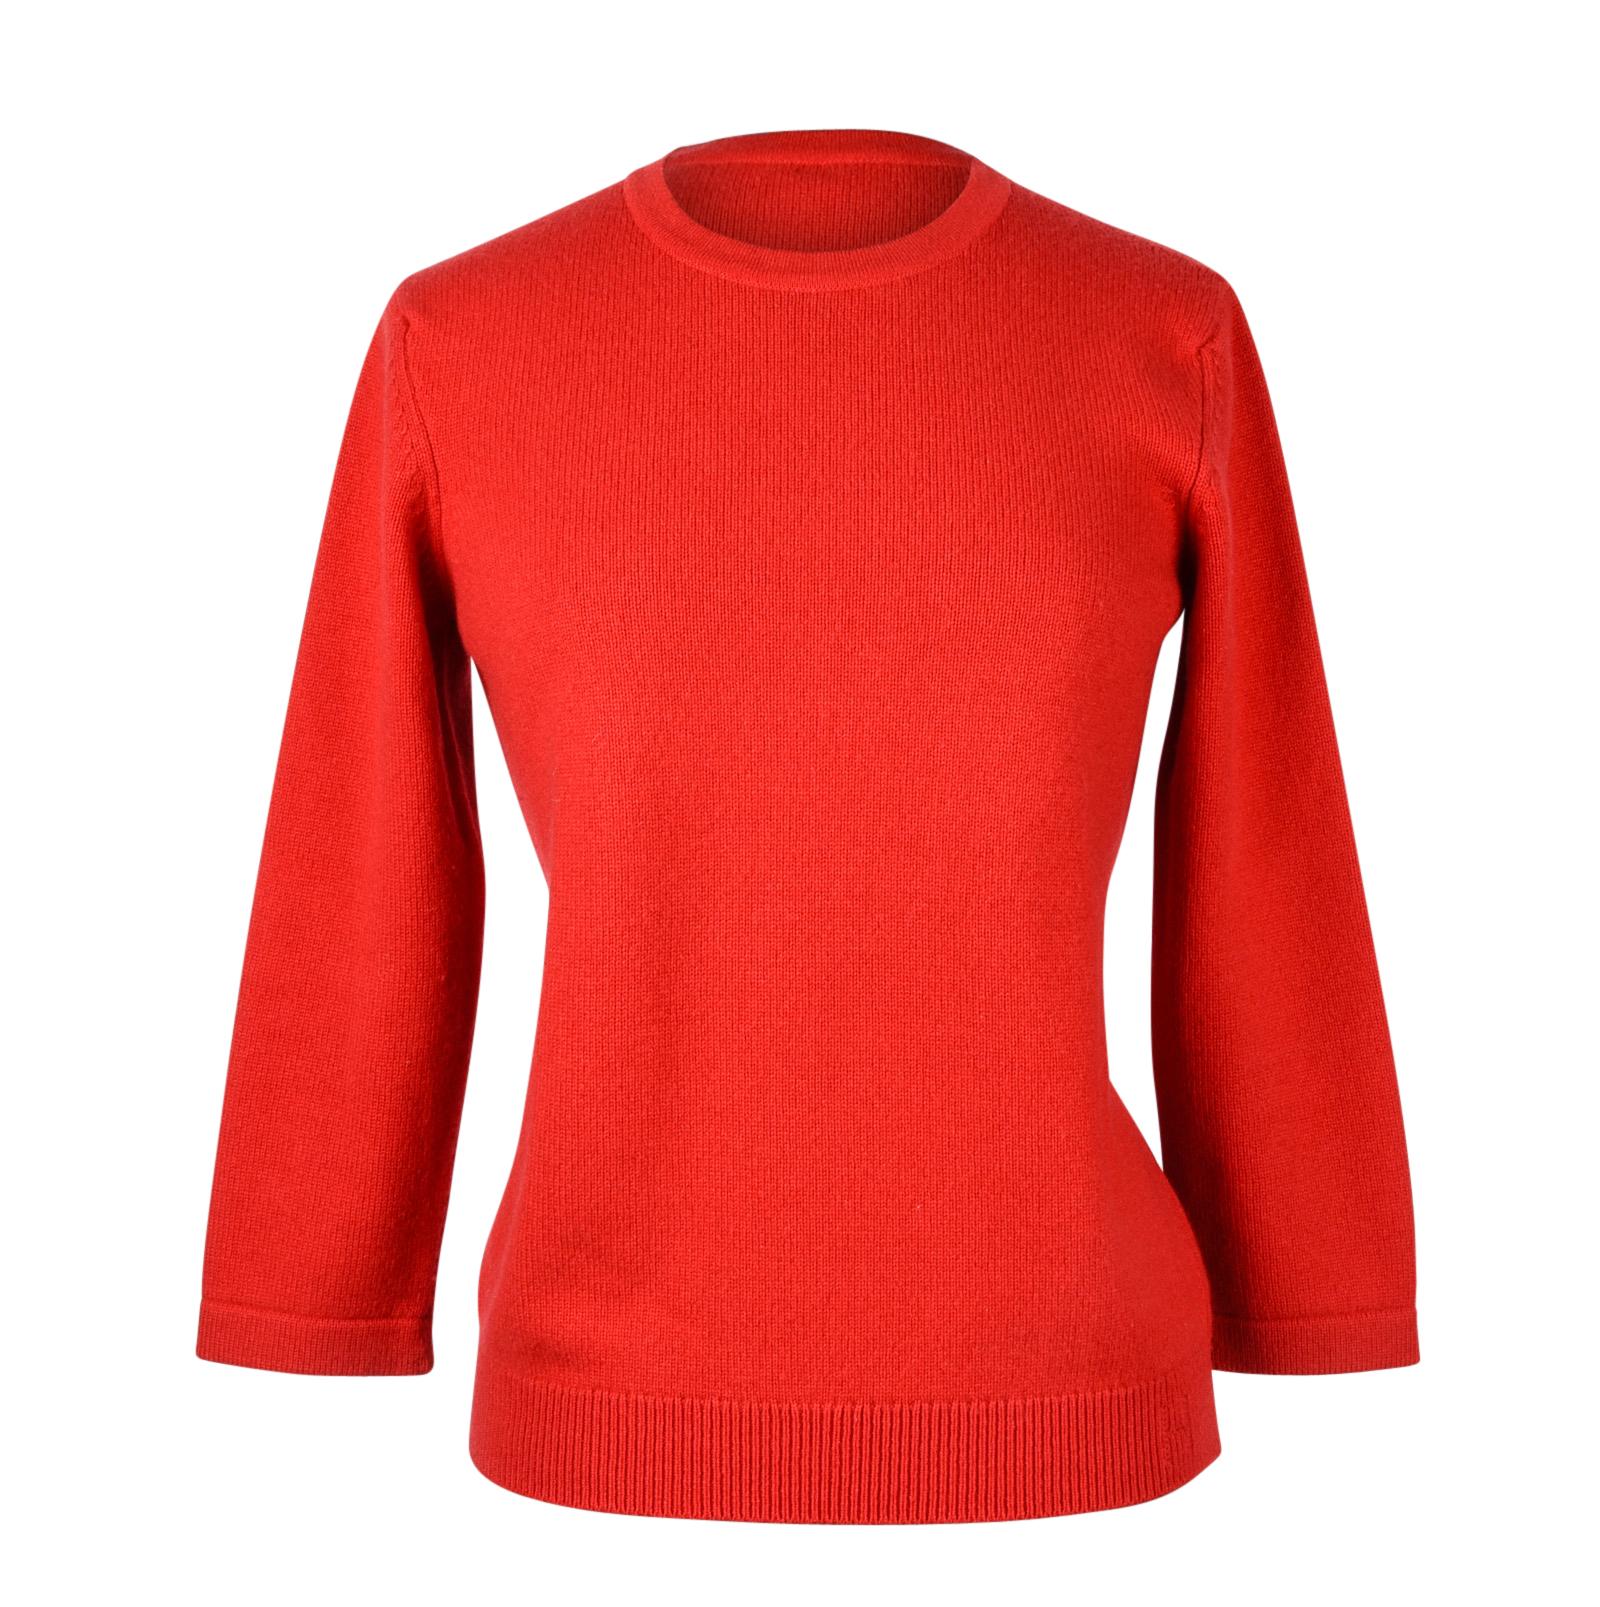 Hermes Sweater Red Wool / Cashmere fits S / M